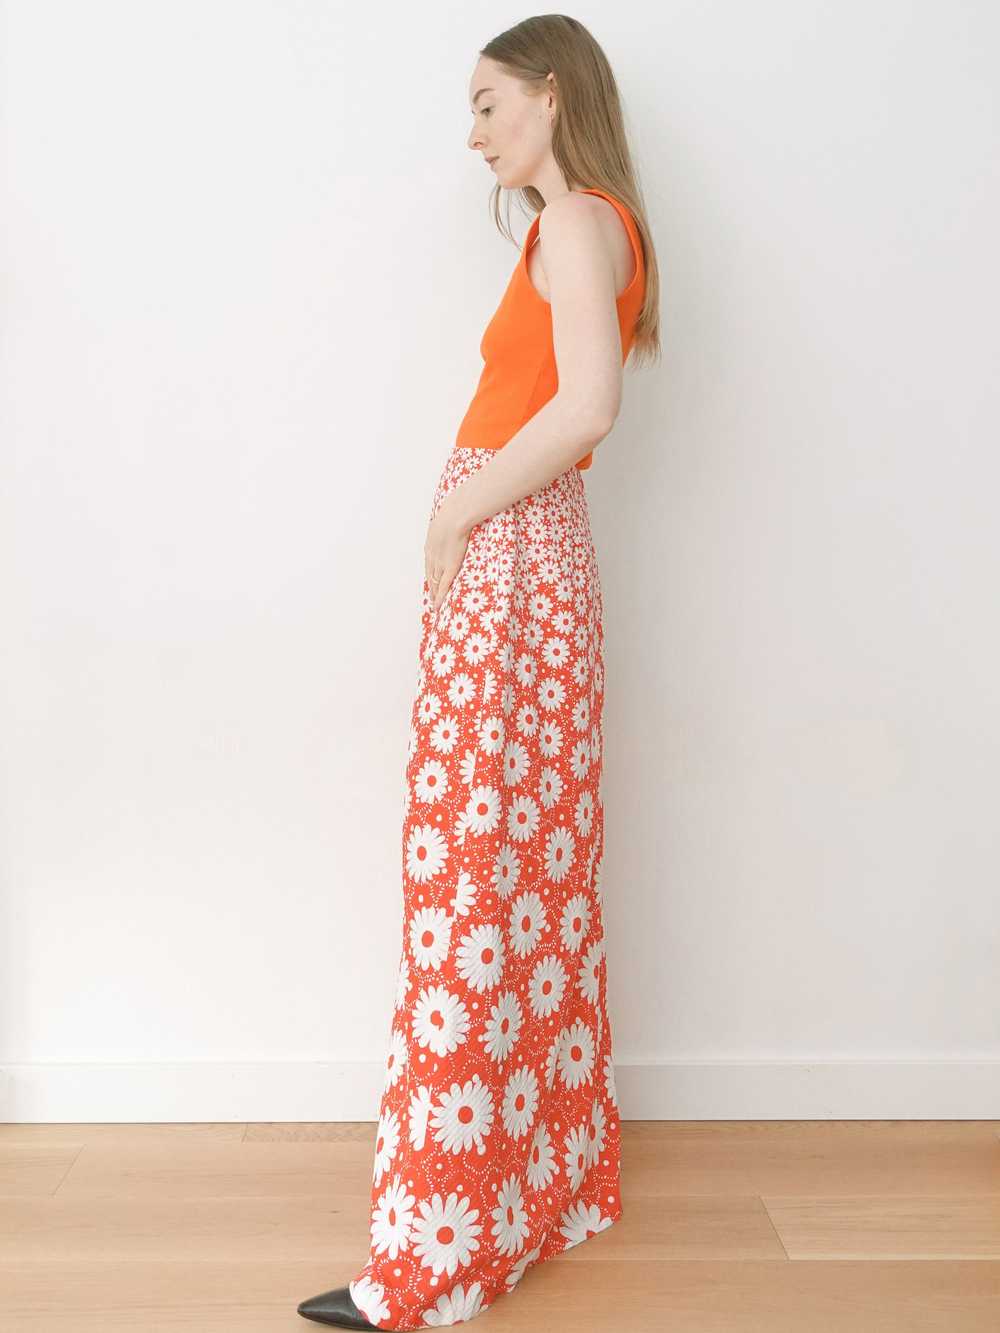 70s Red and White Daisy Print Maxi Skirt - image 2